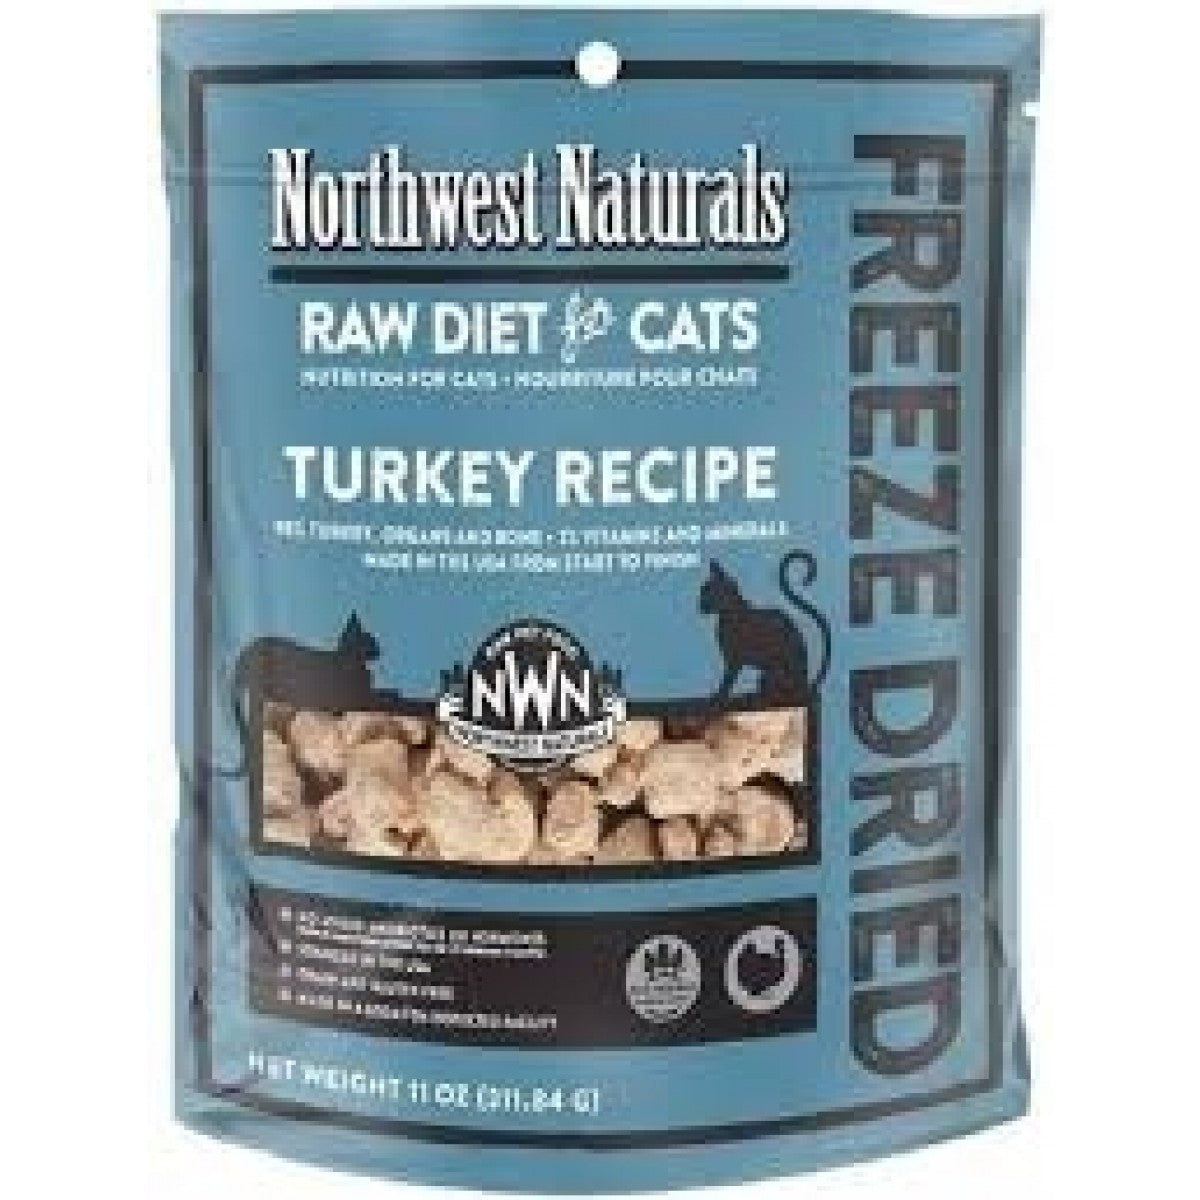 Northwest Naturals Freeze Dried Diets for Cats - Turkey Recipe